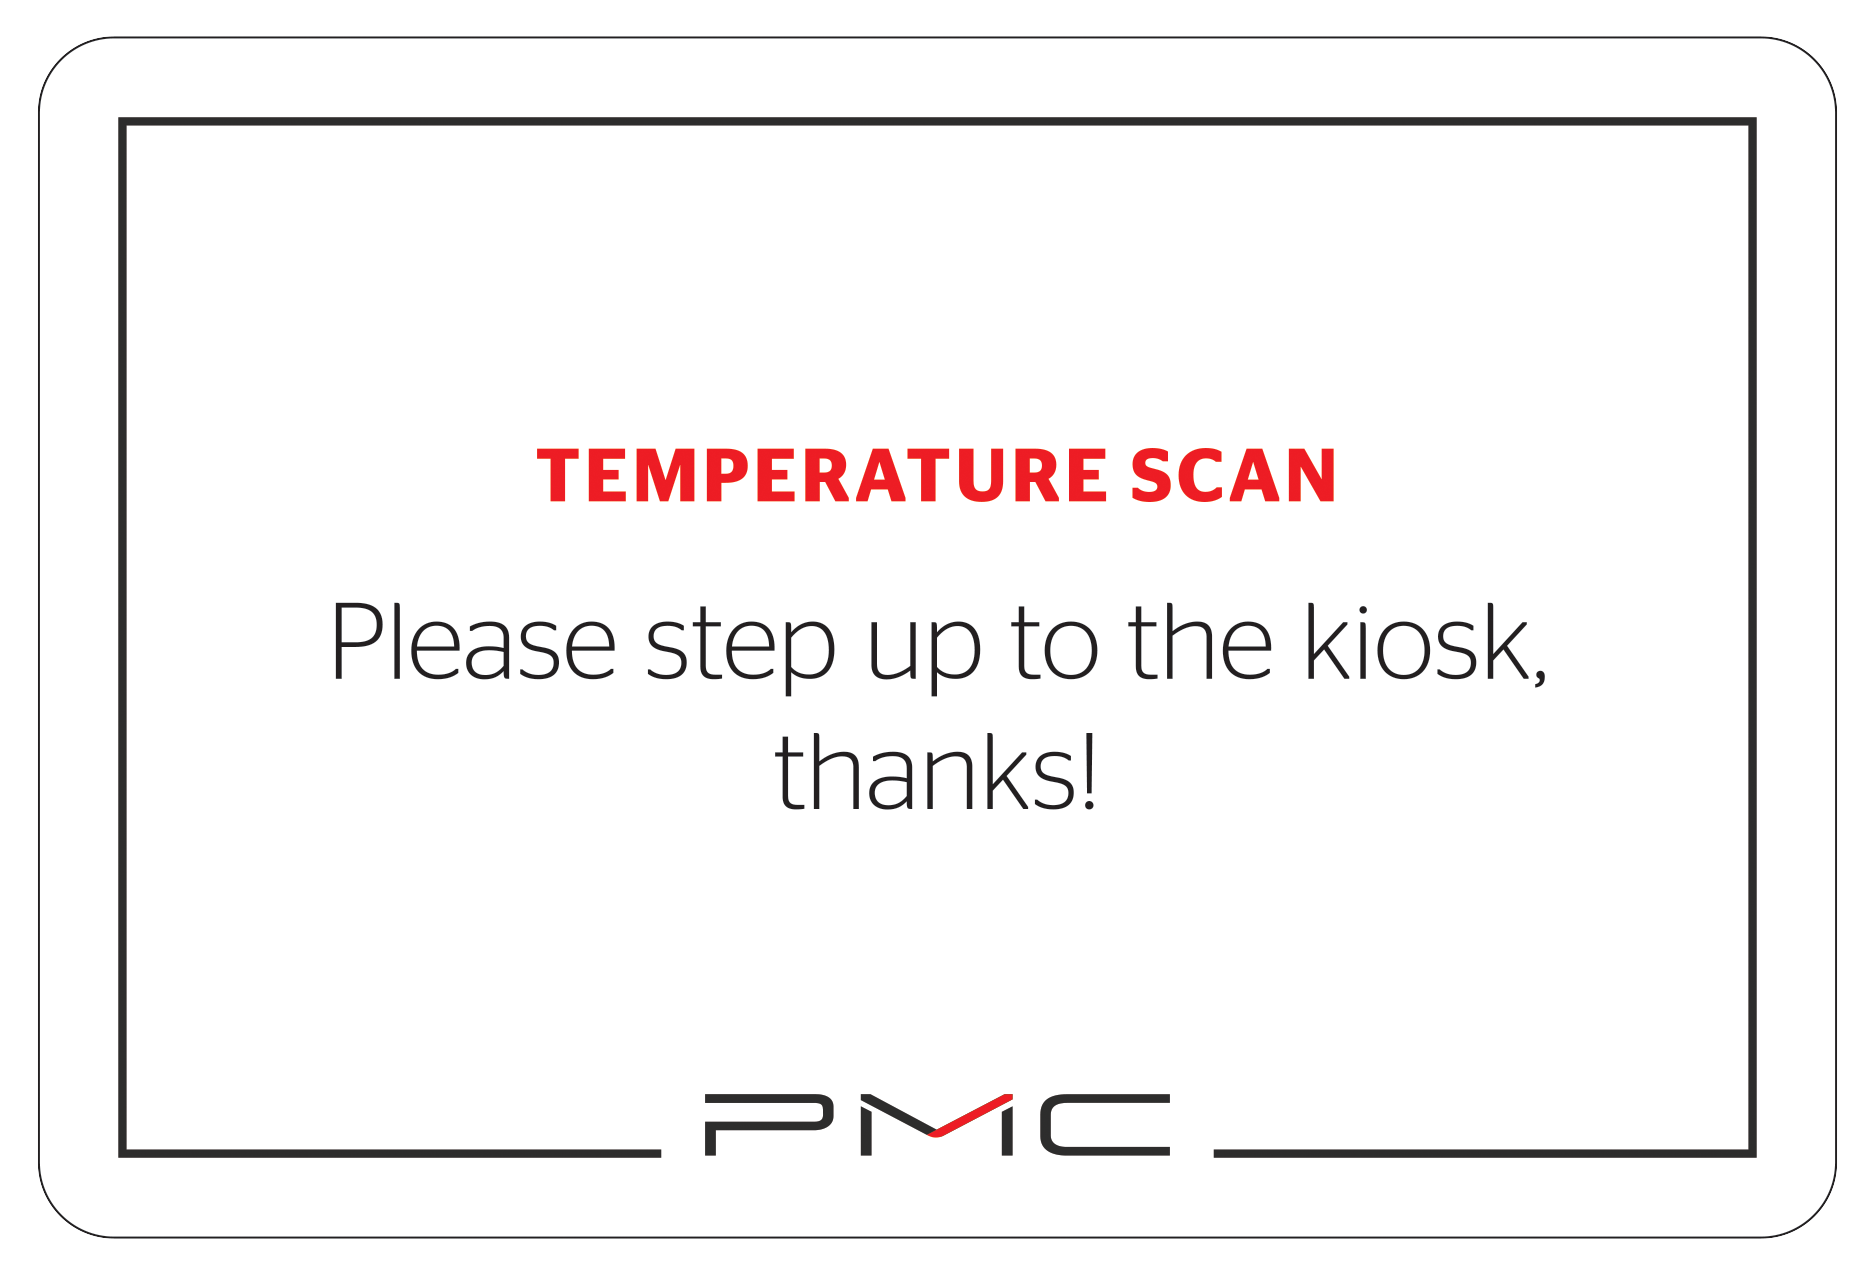 Help your front desk staff manage incoming visitors with temperature kiosk signs indicating where to go and what to do at the booth.